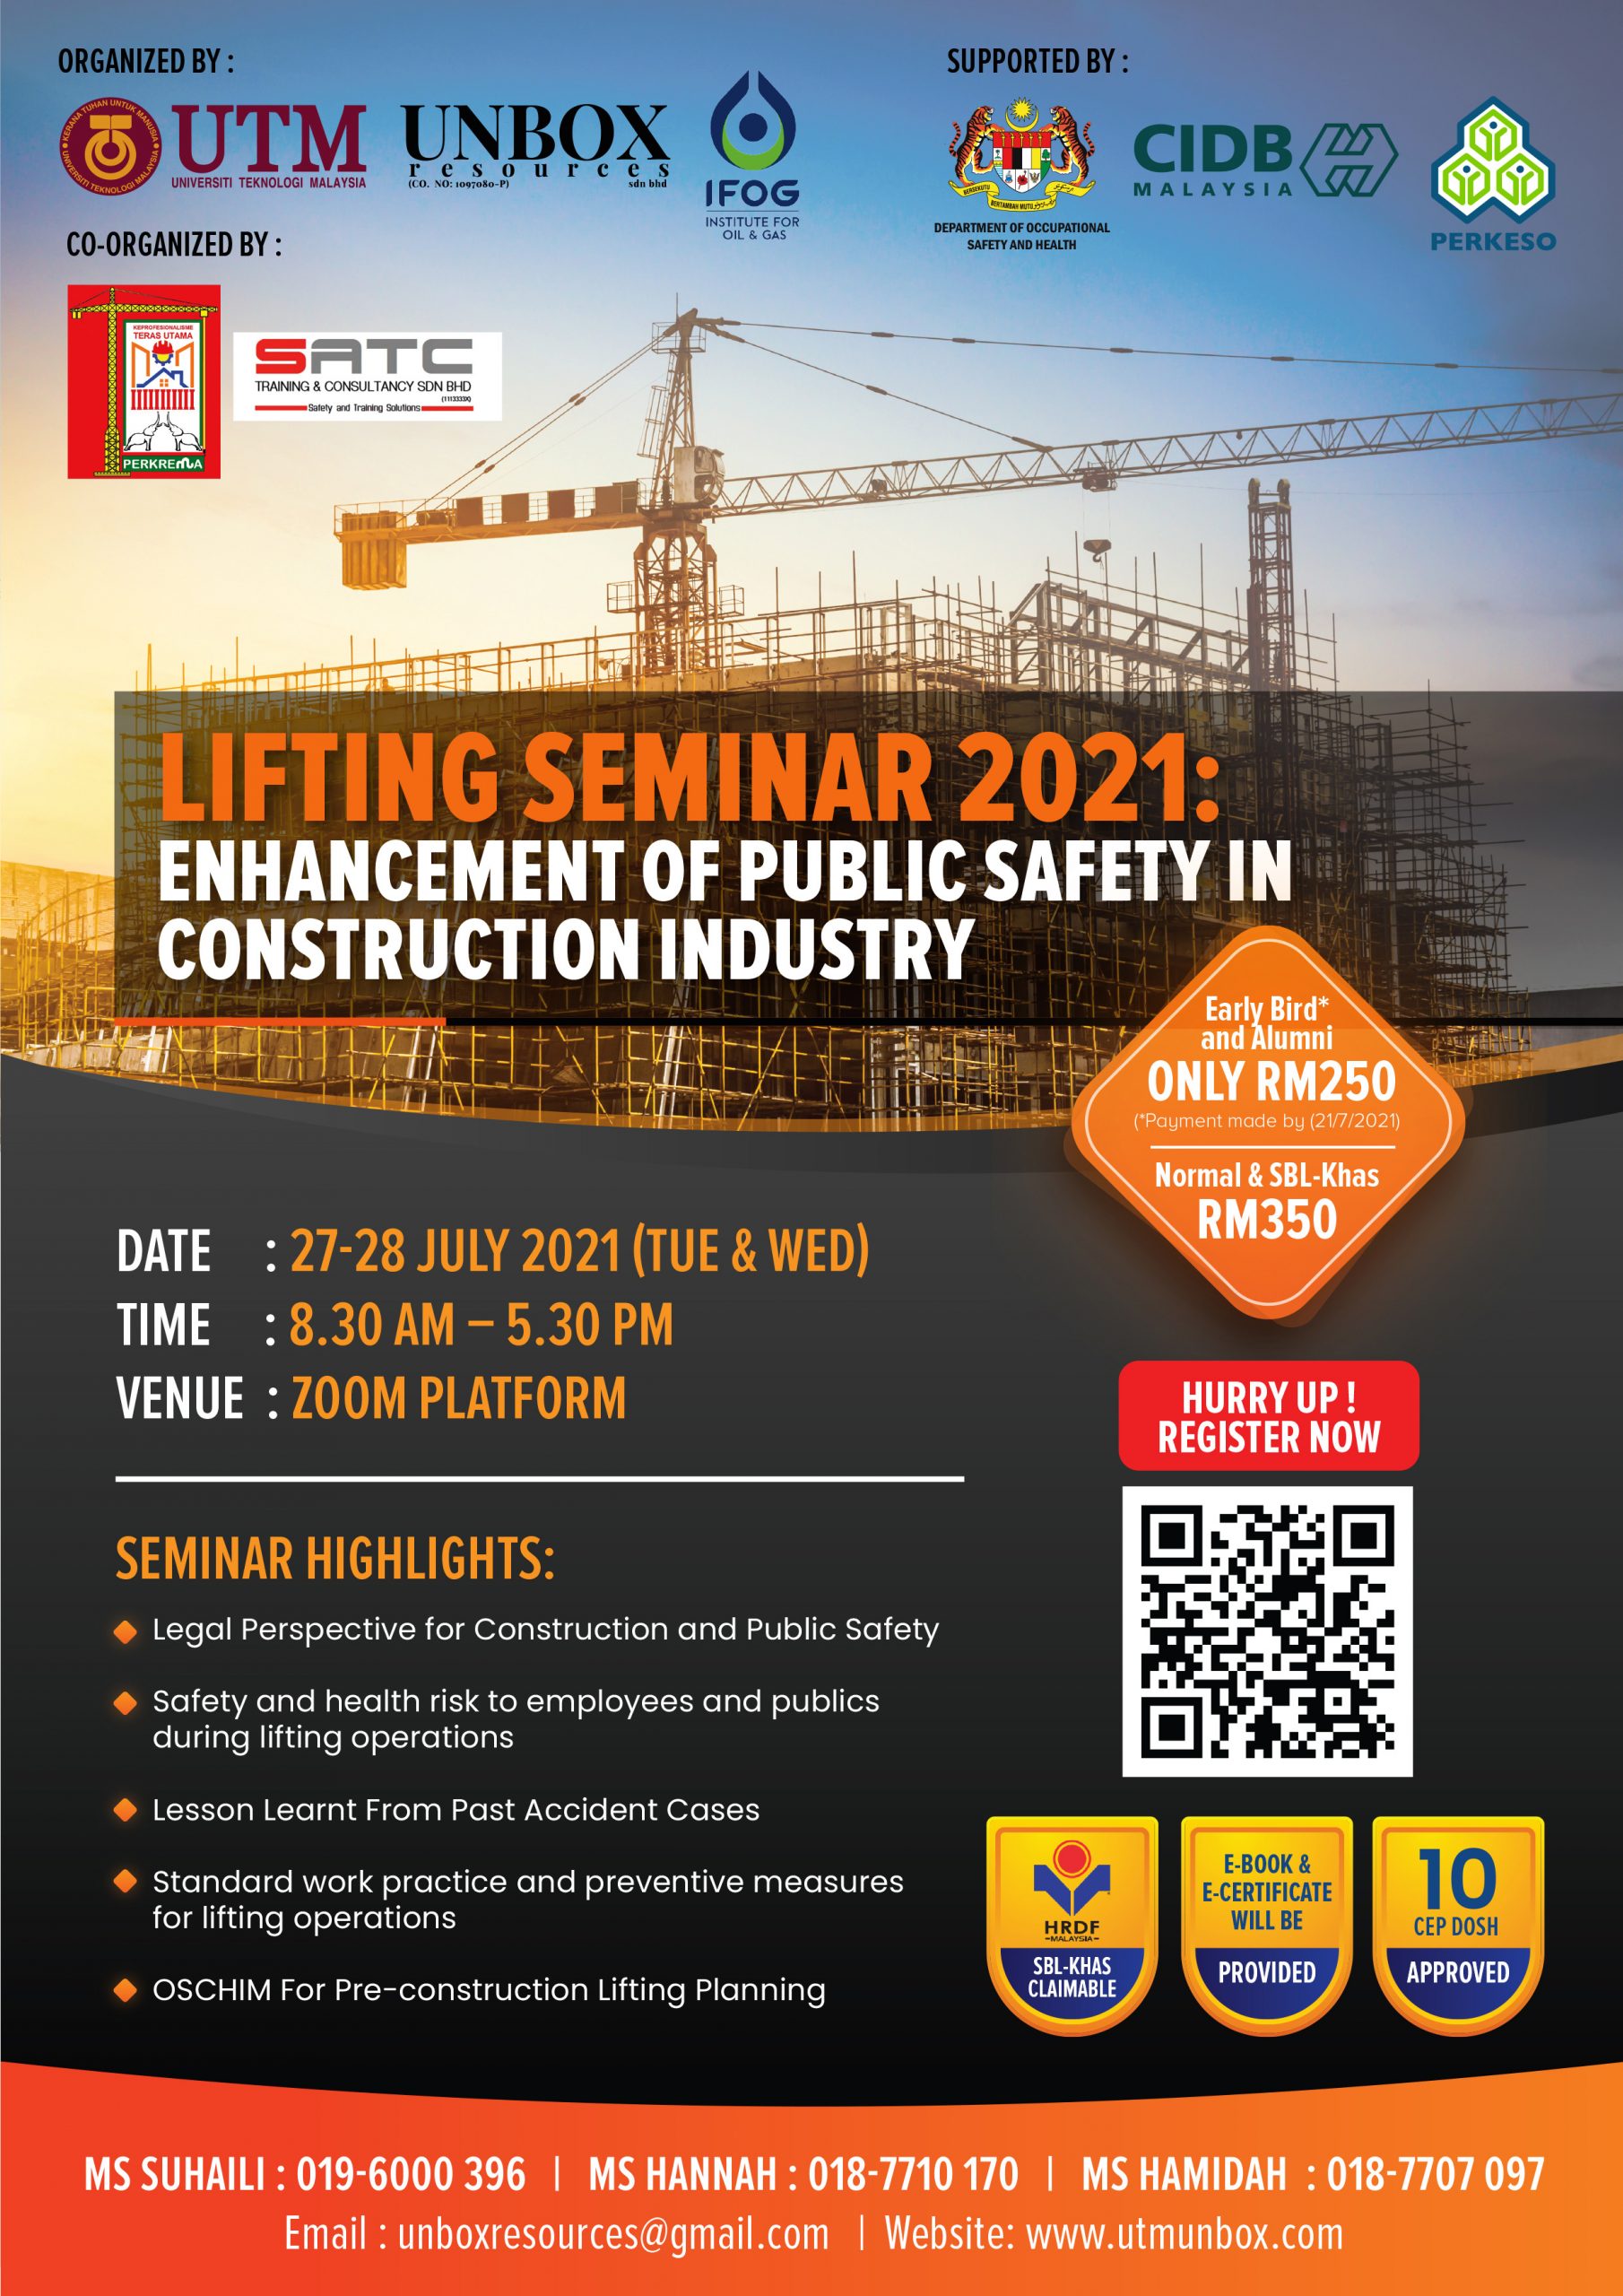 You are currently viewing LIFTING SEMINAR 2021: ENHANCEMENT OF PUBLIC SAFETY IN CONSTRUCTION INDUSTRY